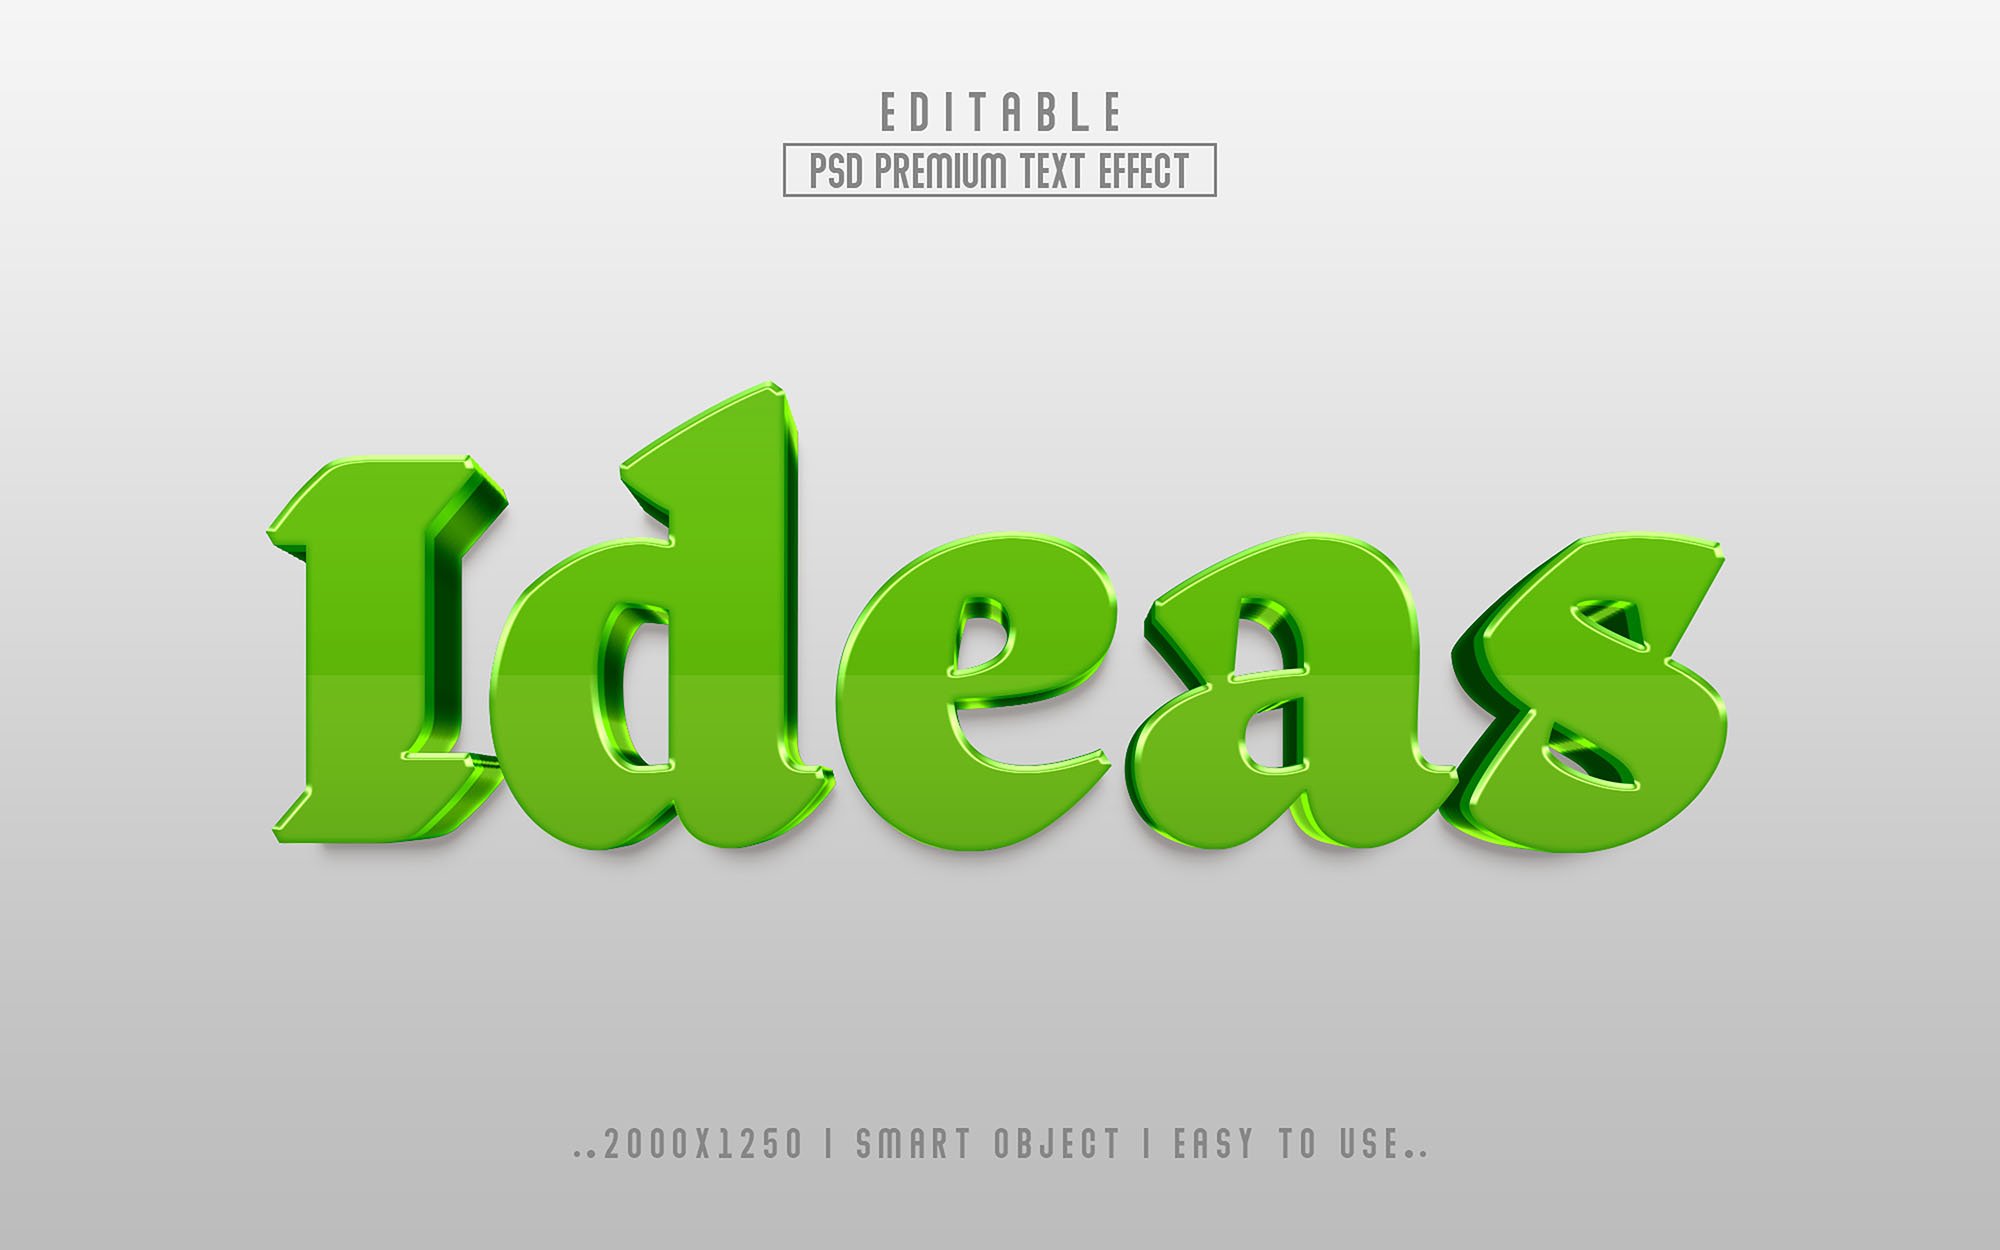 Sweet 3D Editable Text Effect stylecover image.